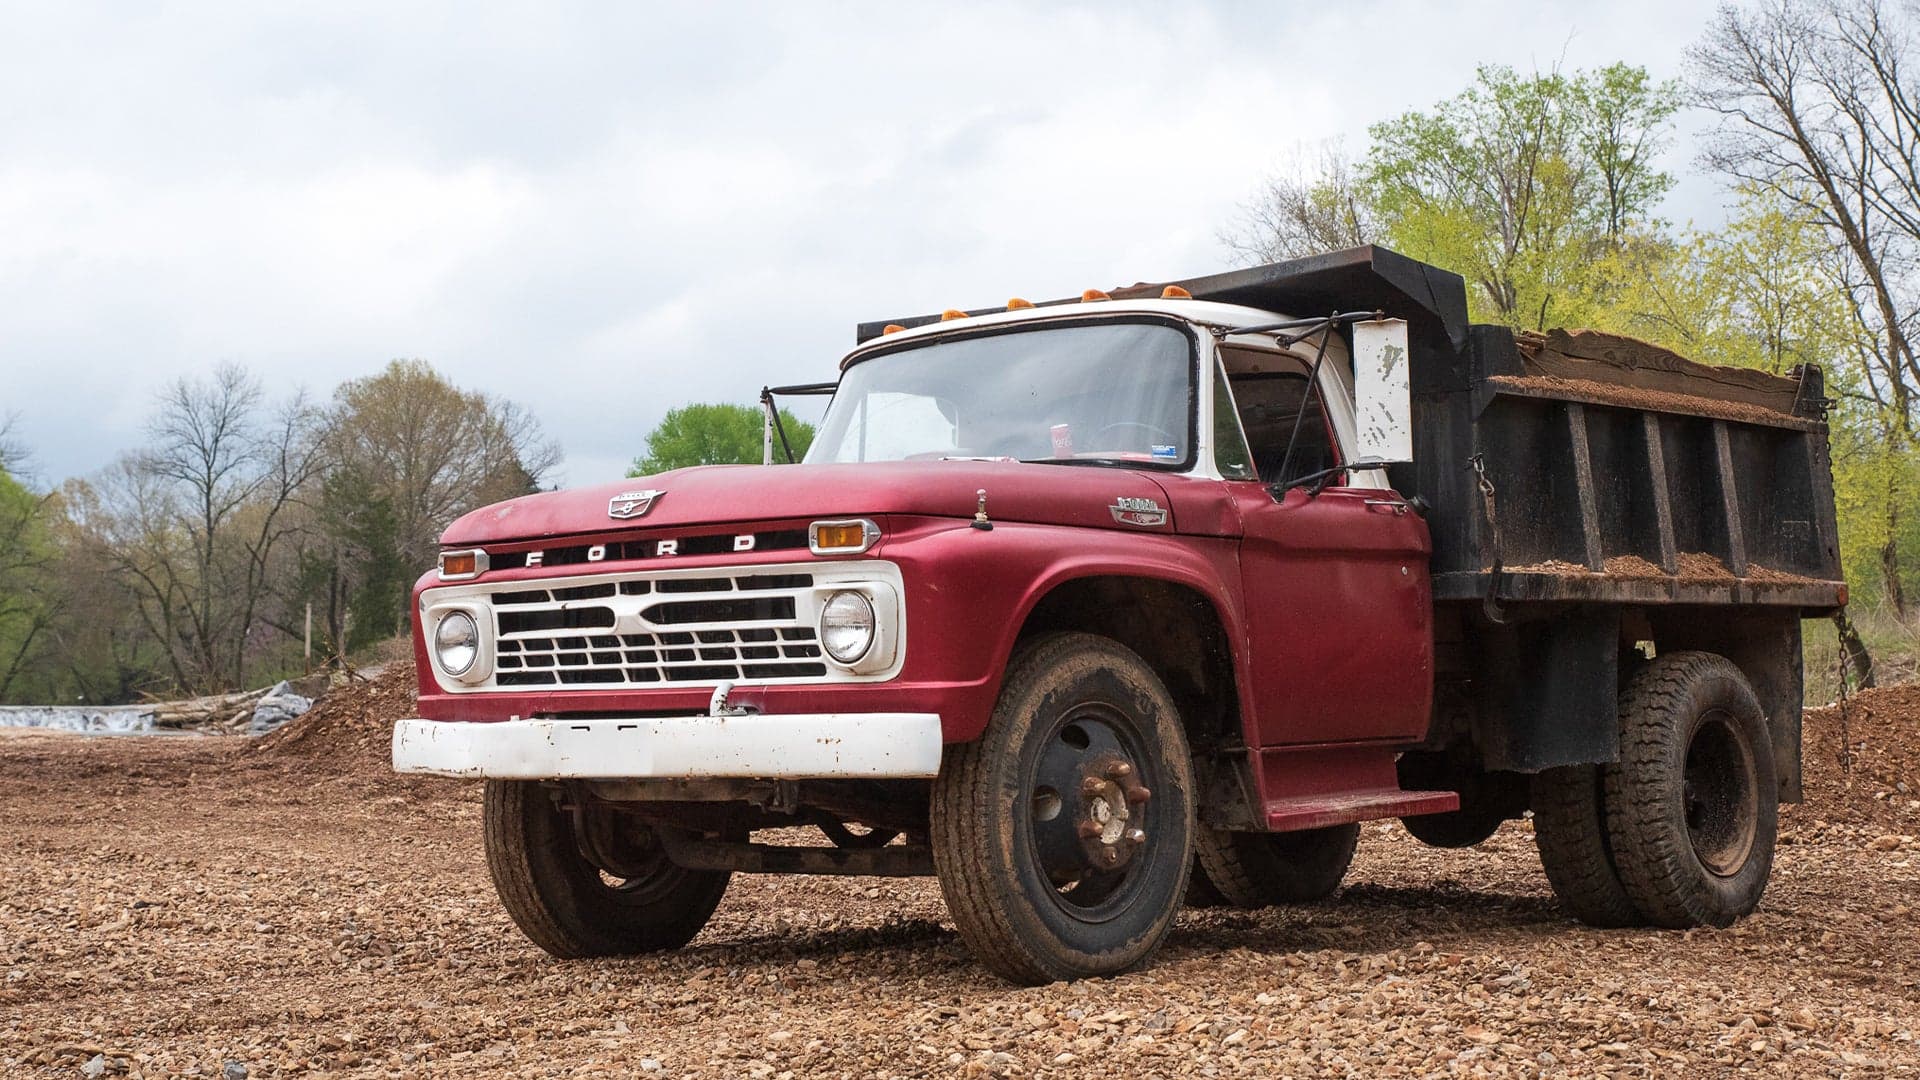 I’ve Hauled 1,000,000 Pounds of Rock in My 1966 Ford Dump Truck This Year Alone